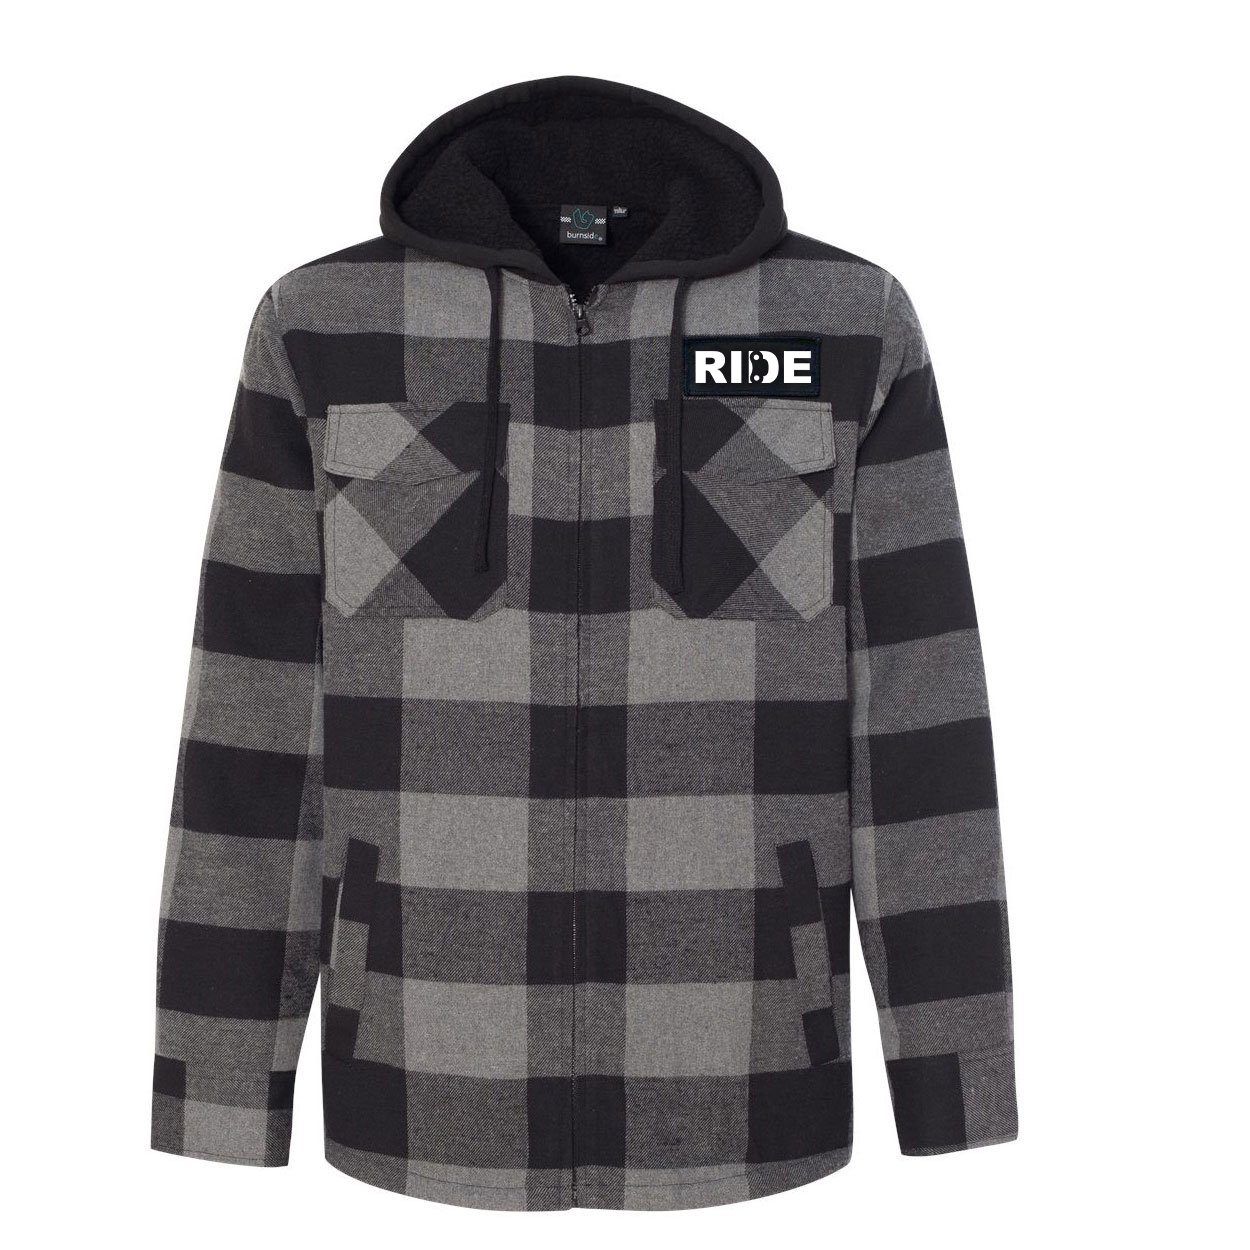 Ride Chain Logo Classic Unisex Full Zip Woven Patch Hooded Flannel Jacket Black/Gray (White Logo)